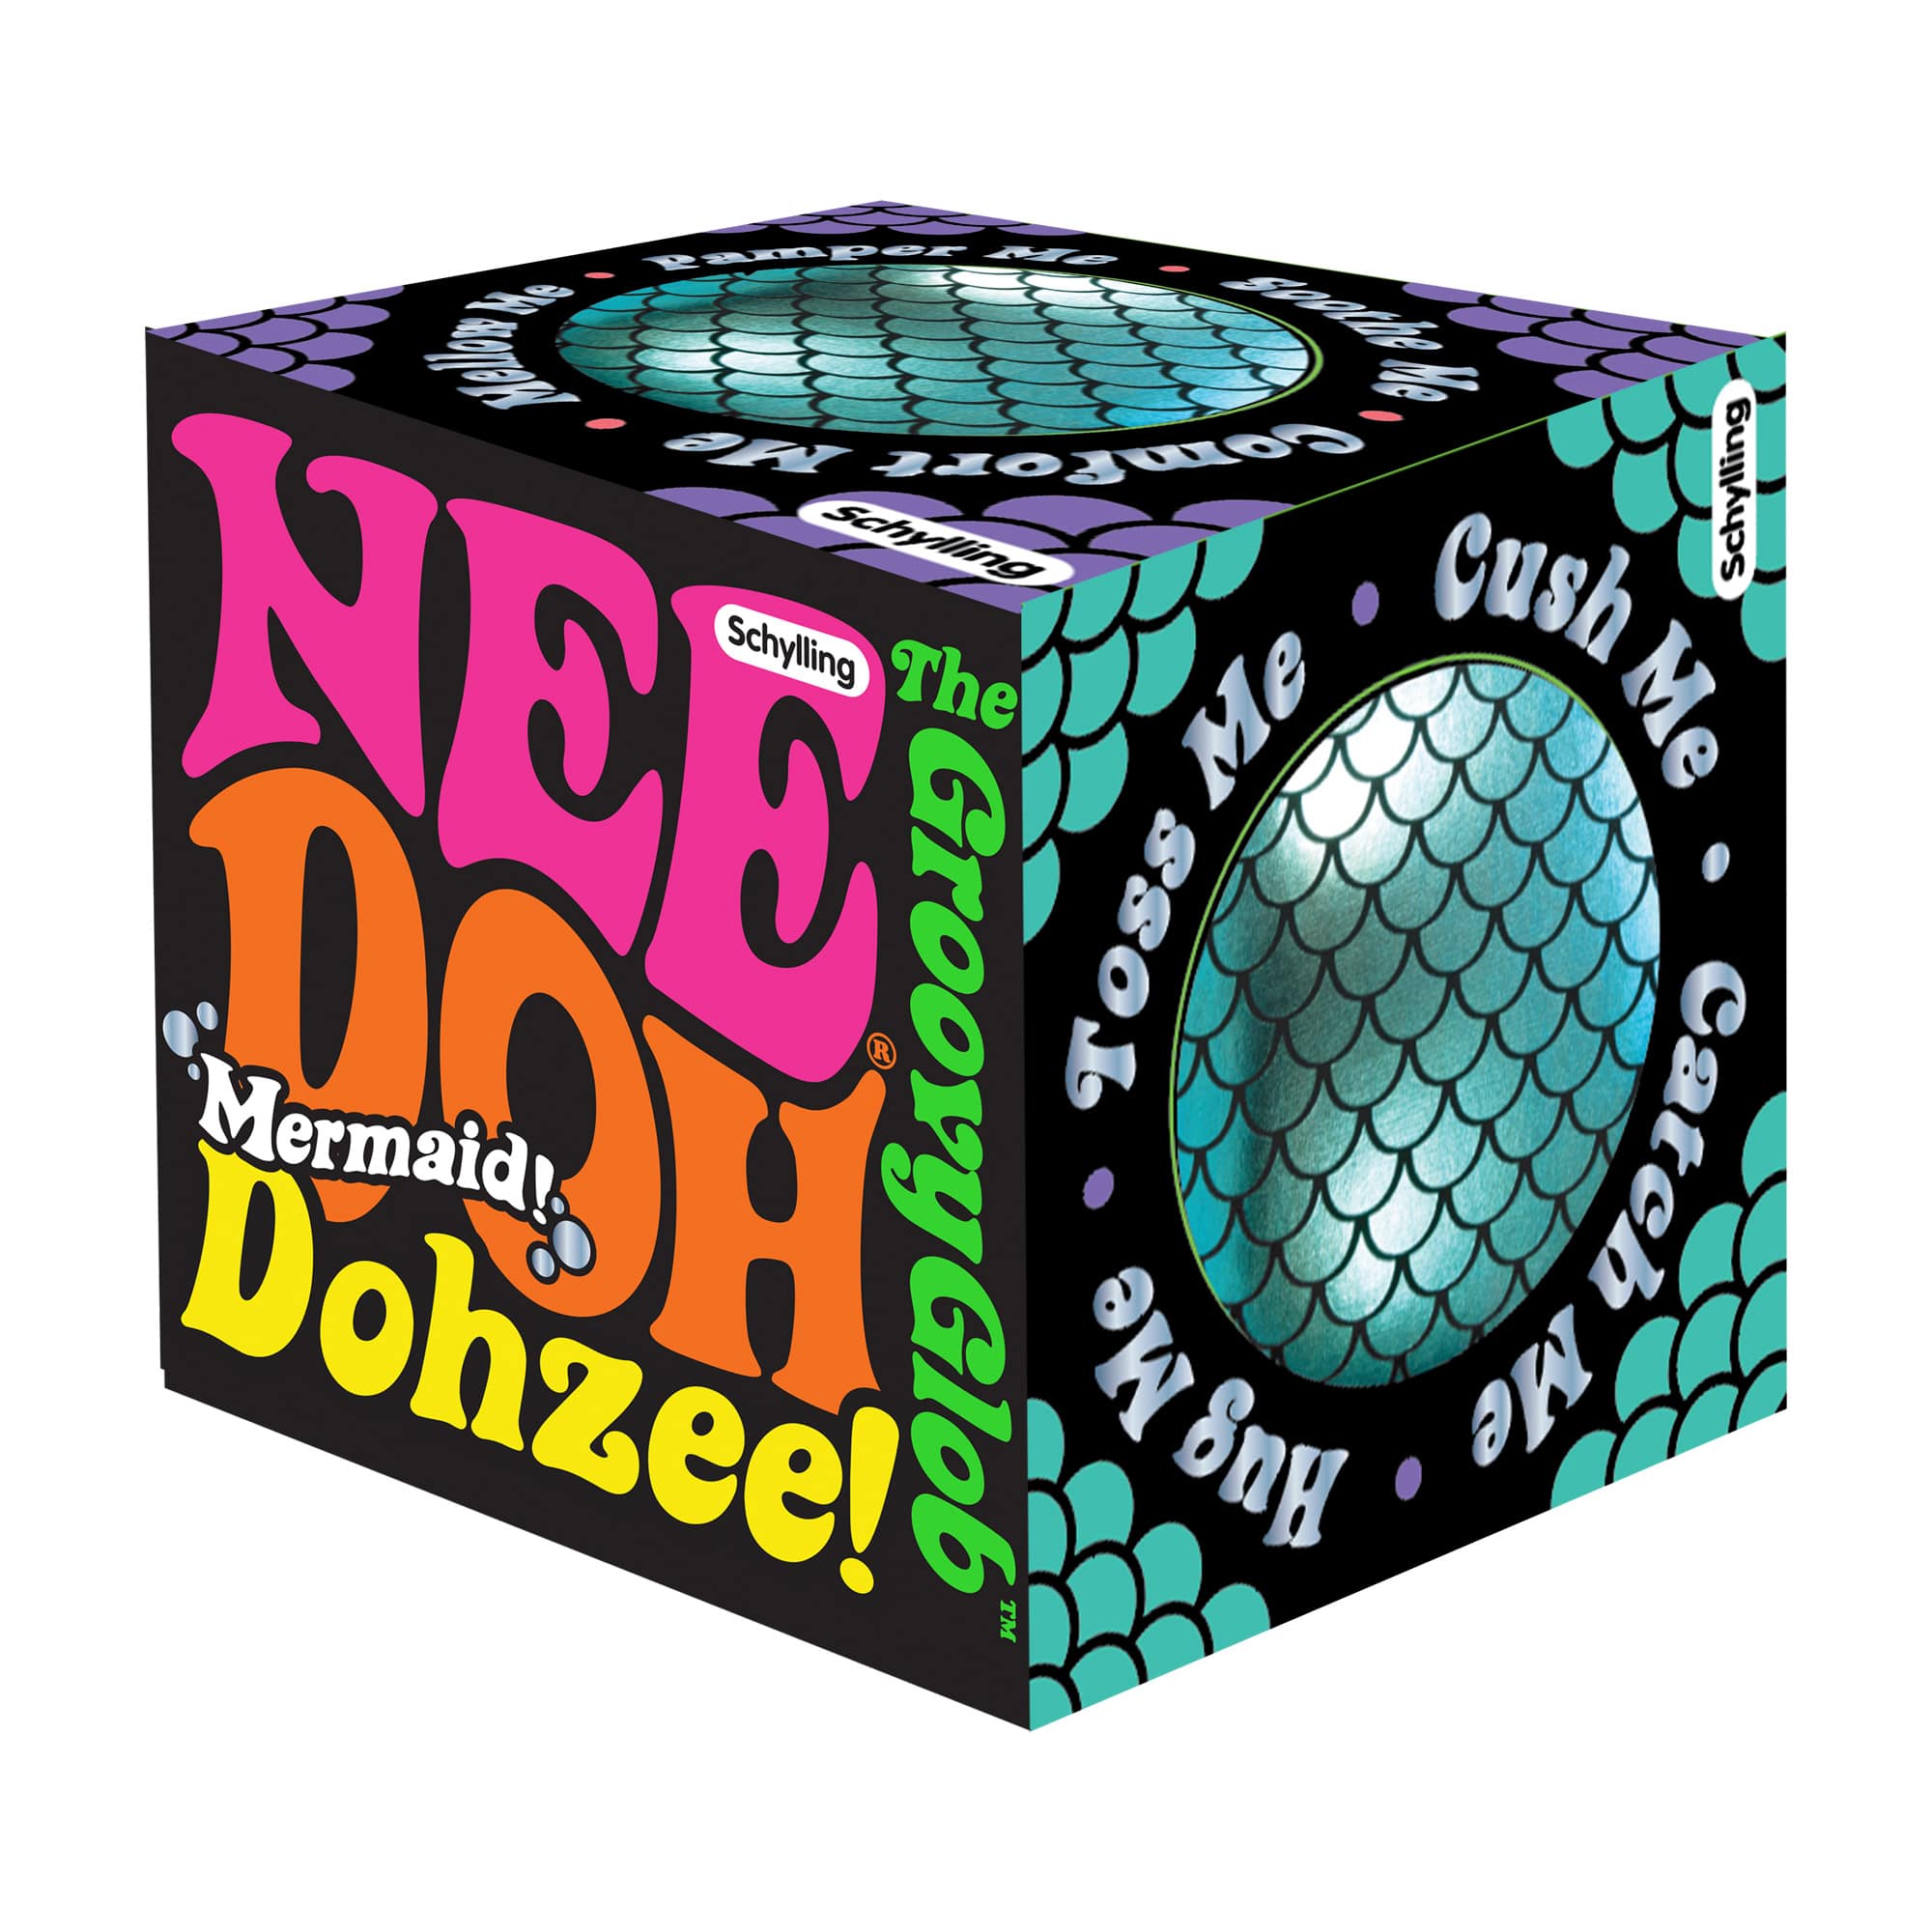 Front view of the Nee Doh Doze-Mermaid in its packaging.